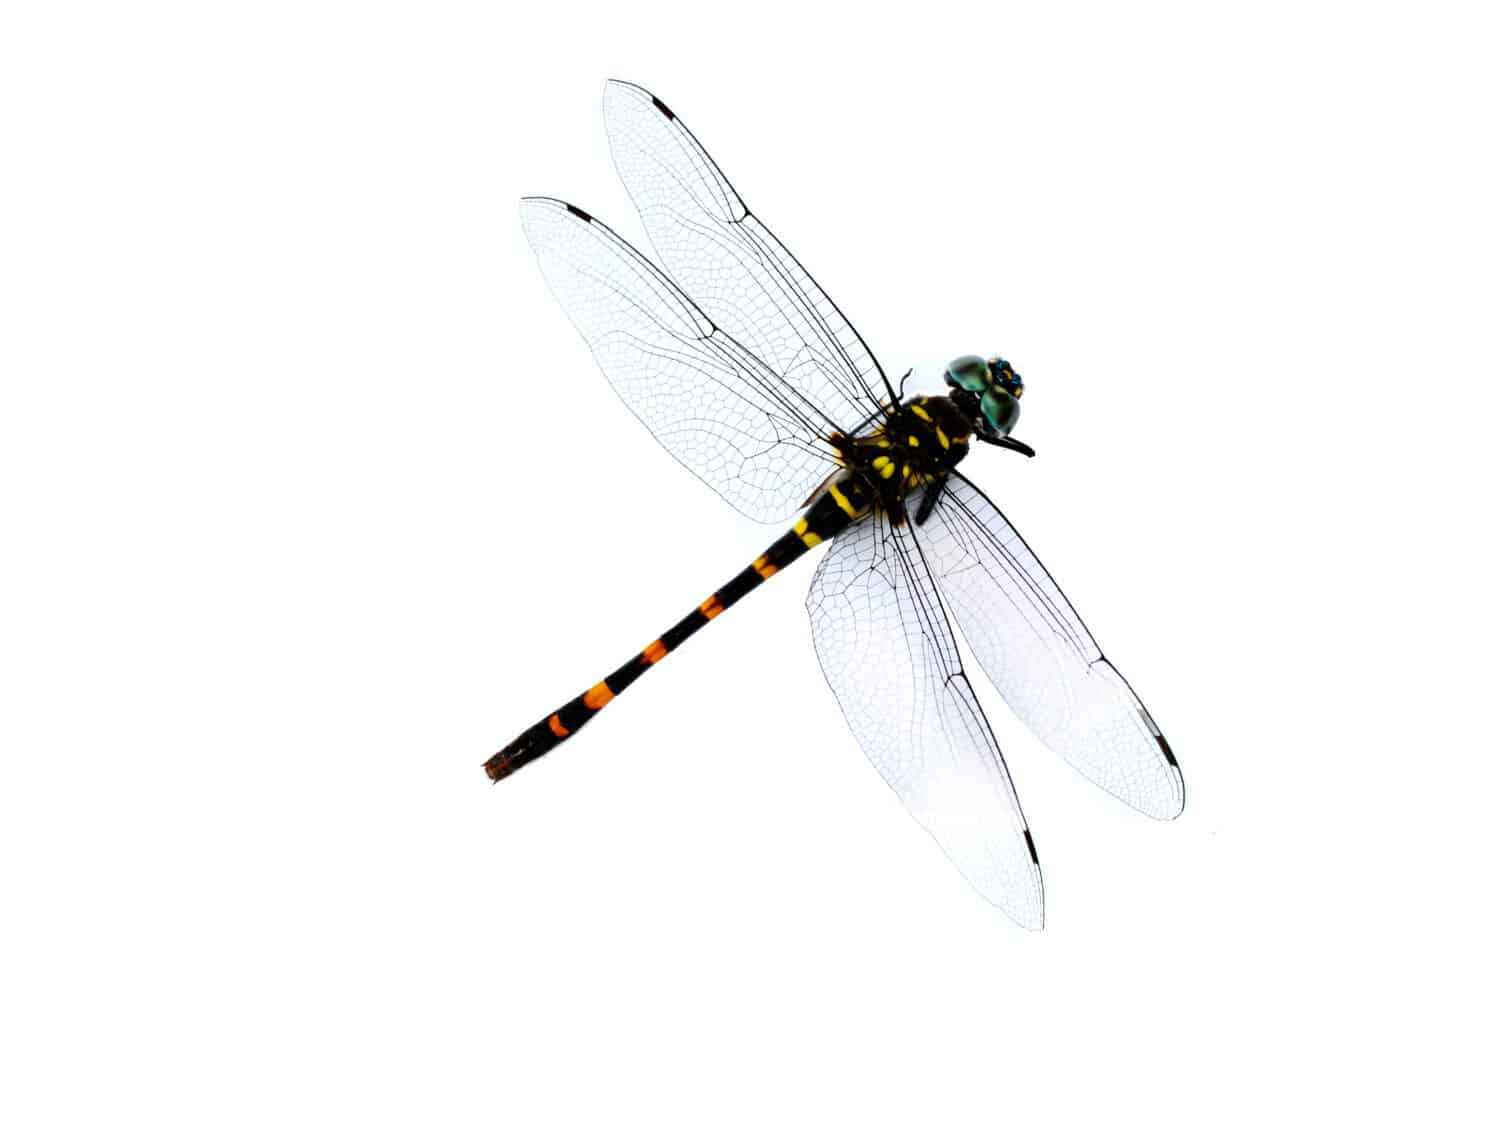 dragonfly isolated on white background. Yellow and back Dragonfly Gomphus flavipes.